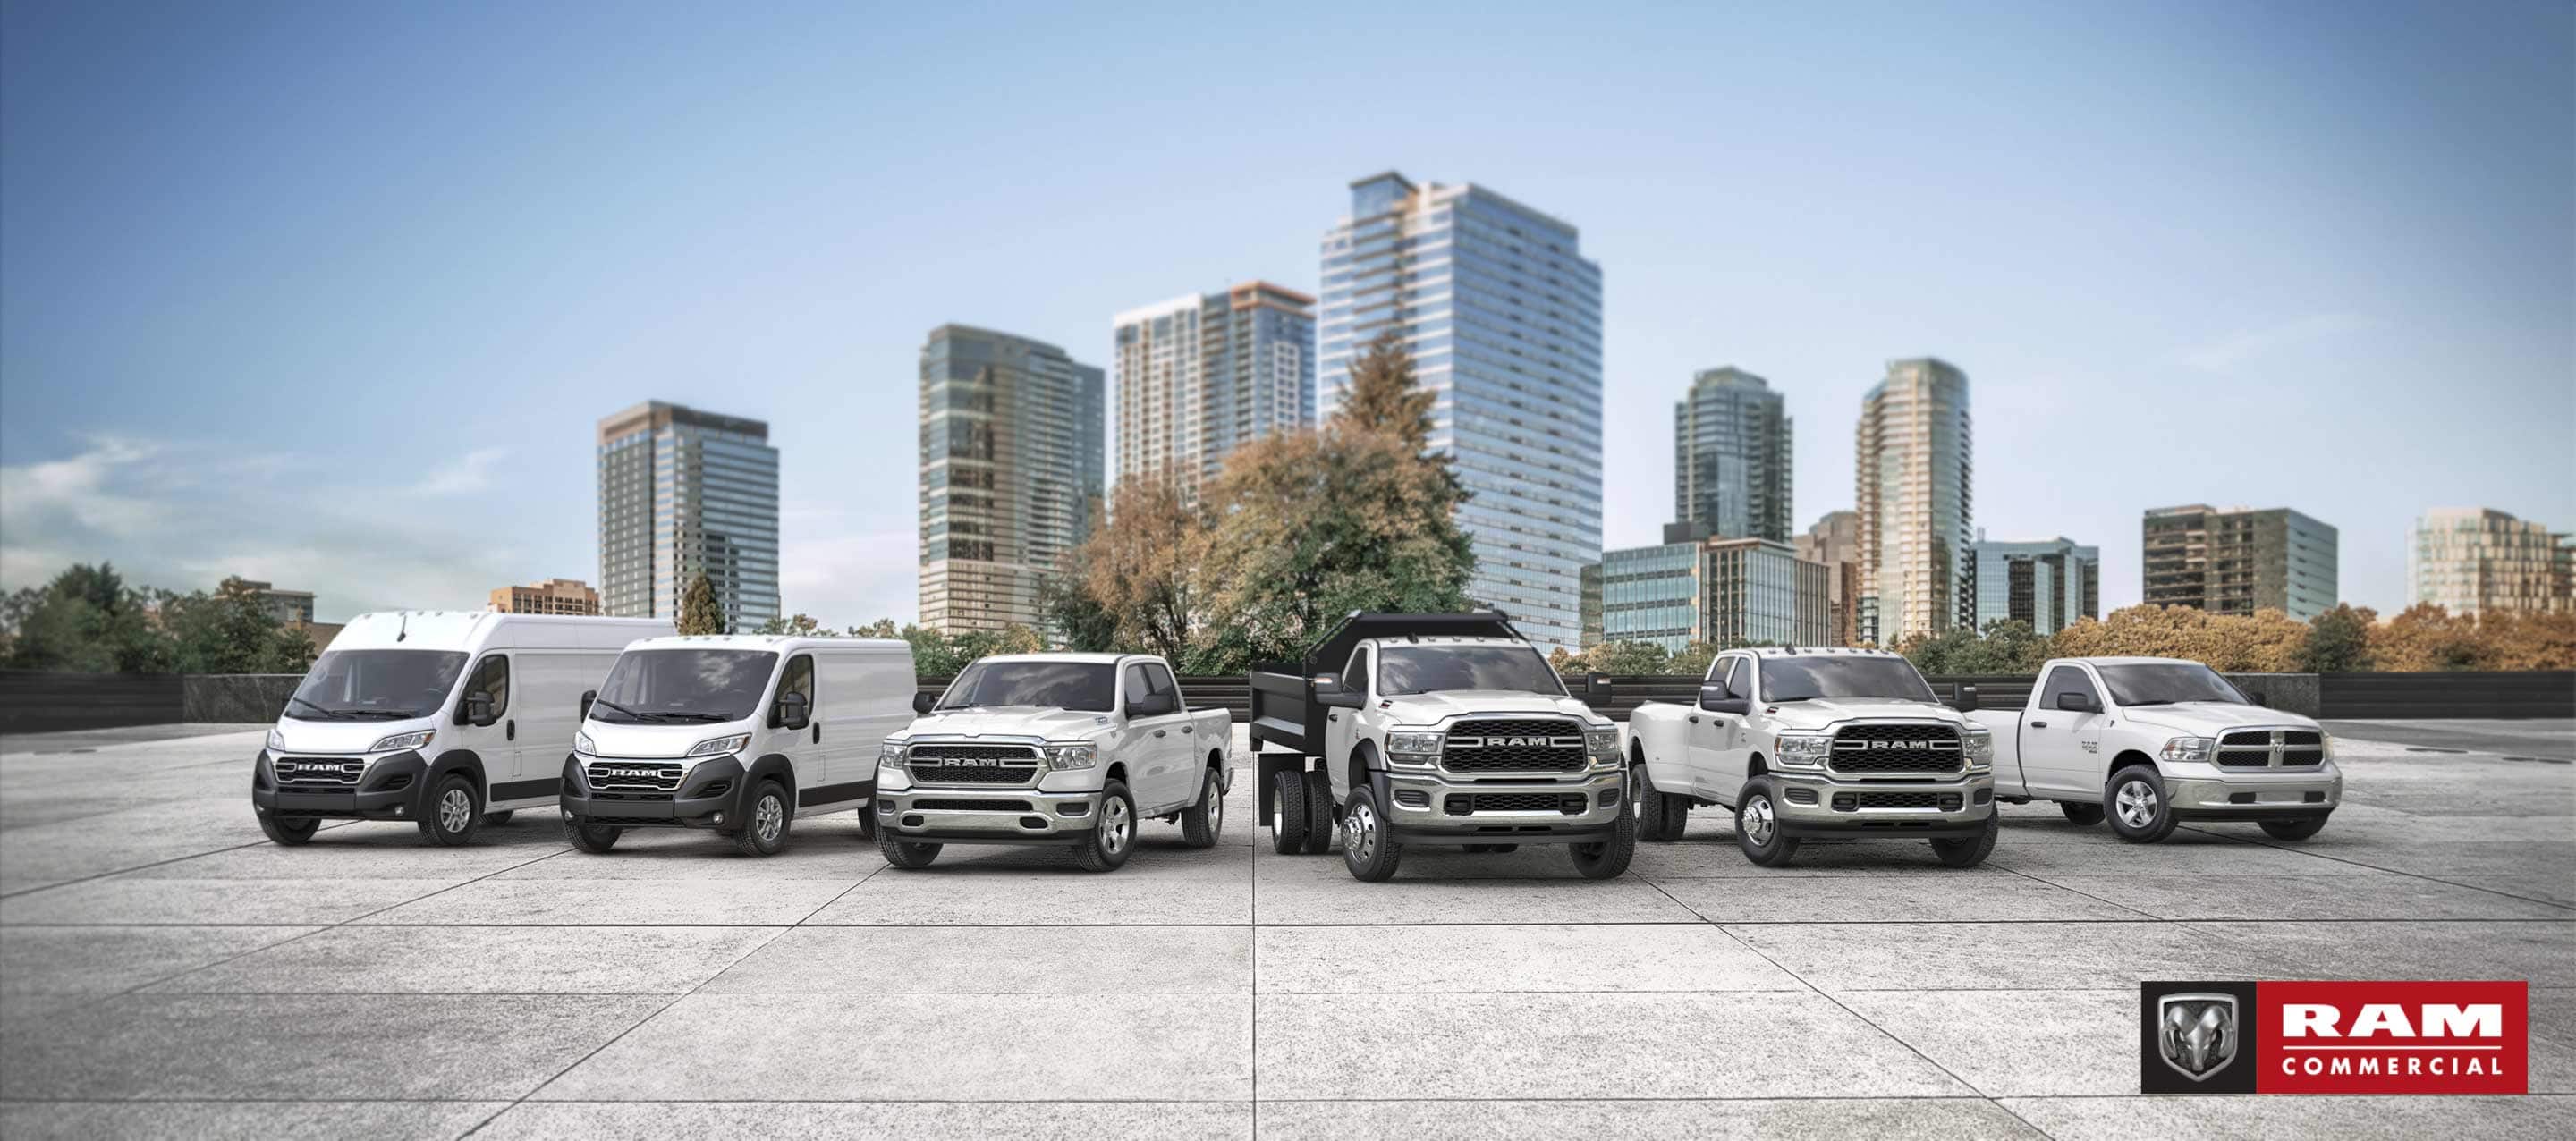 The Ram Brand lineup, all in white, parked side-by-side. Beginning on the left: a 2023 Ram ProMaster 3500 High Roof Cargo Van, 2022 Ram ProMaster City Cargo Van, 2023 Ram 1500 Tradesman Crew Cab, 2023 Ram 5500 Tradesman Regular Cab with dump body, 2023 Ram 3500 Tradesman Crew Cab and 2023 Ram 1500 Classic Regular Cab. Ram Commercial.